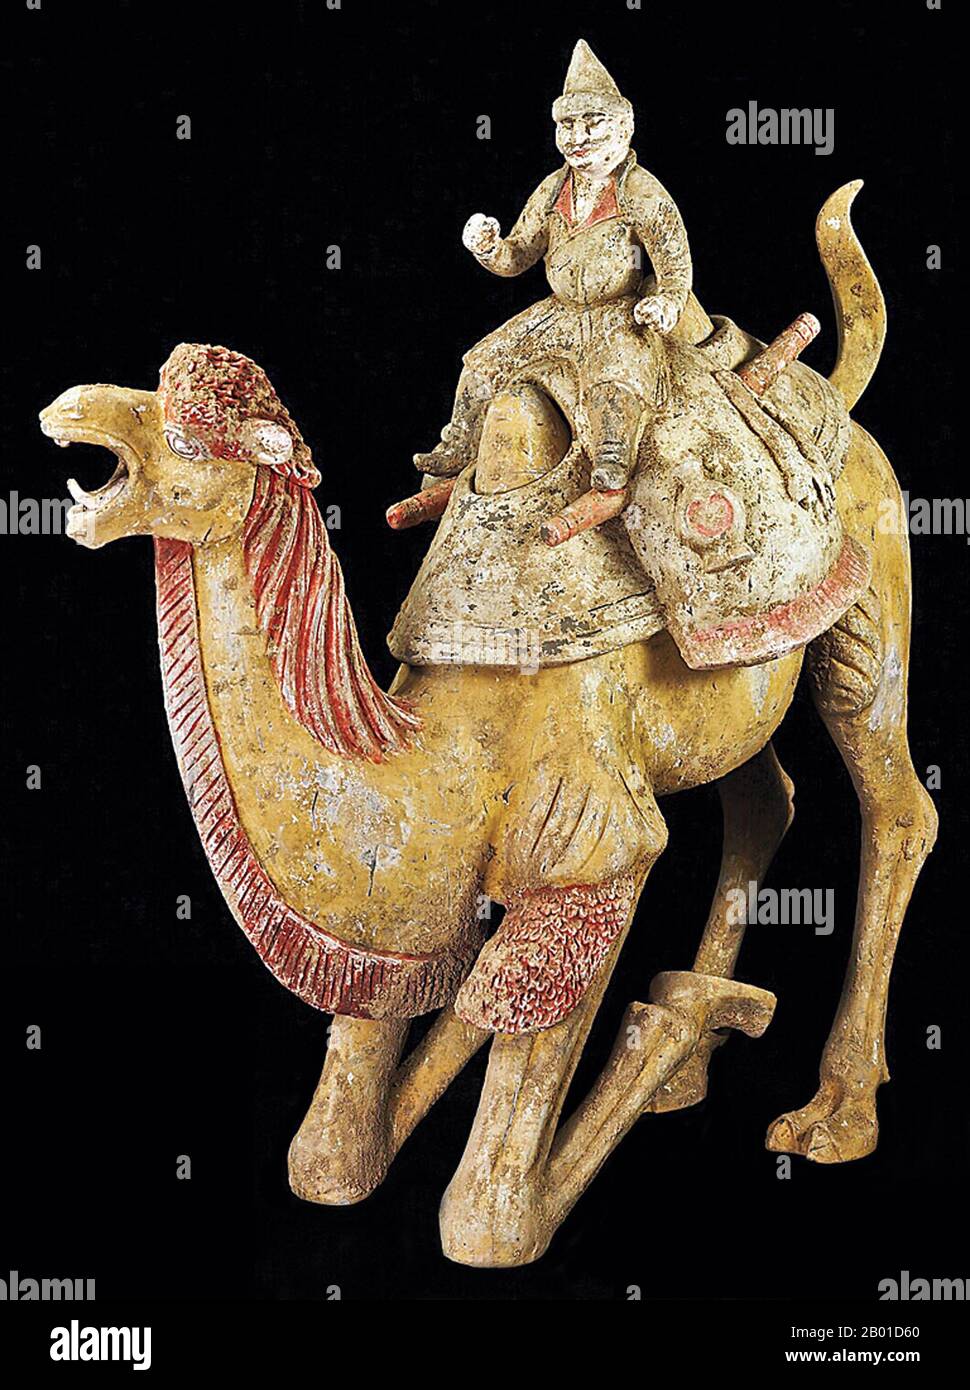 China: A camel rider, probably of Central Asian origin, riding a Bactrian camel, Tang Dynasty (618-907 CE).  The Bactrian camel (Camelus bactrianus) is a large even-toed ungulate native to the steppes of Central Asia. It is presently restricted in the wild to remote regions of the Gobi and Taklimakan Deserts of Mongolia and Xinjiang.  There are a small number of wild Bactrian camels still roaming the Mangystau Province of South West Kazakhstan. It is one of the two surviving species of camel. The Bactrian camel has two humps on its back, in contrast to the single-humped Dromedary camel. Stock Photo